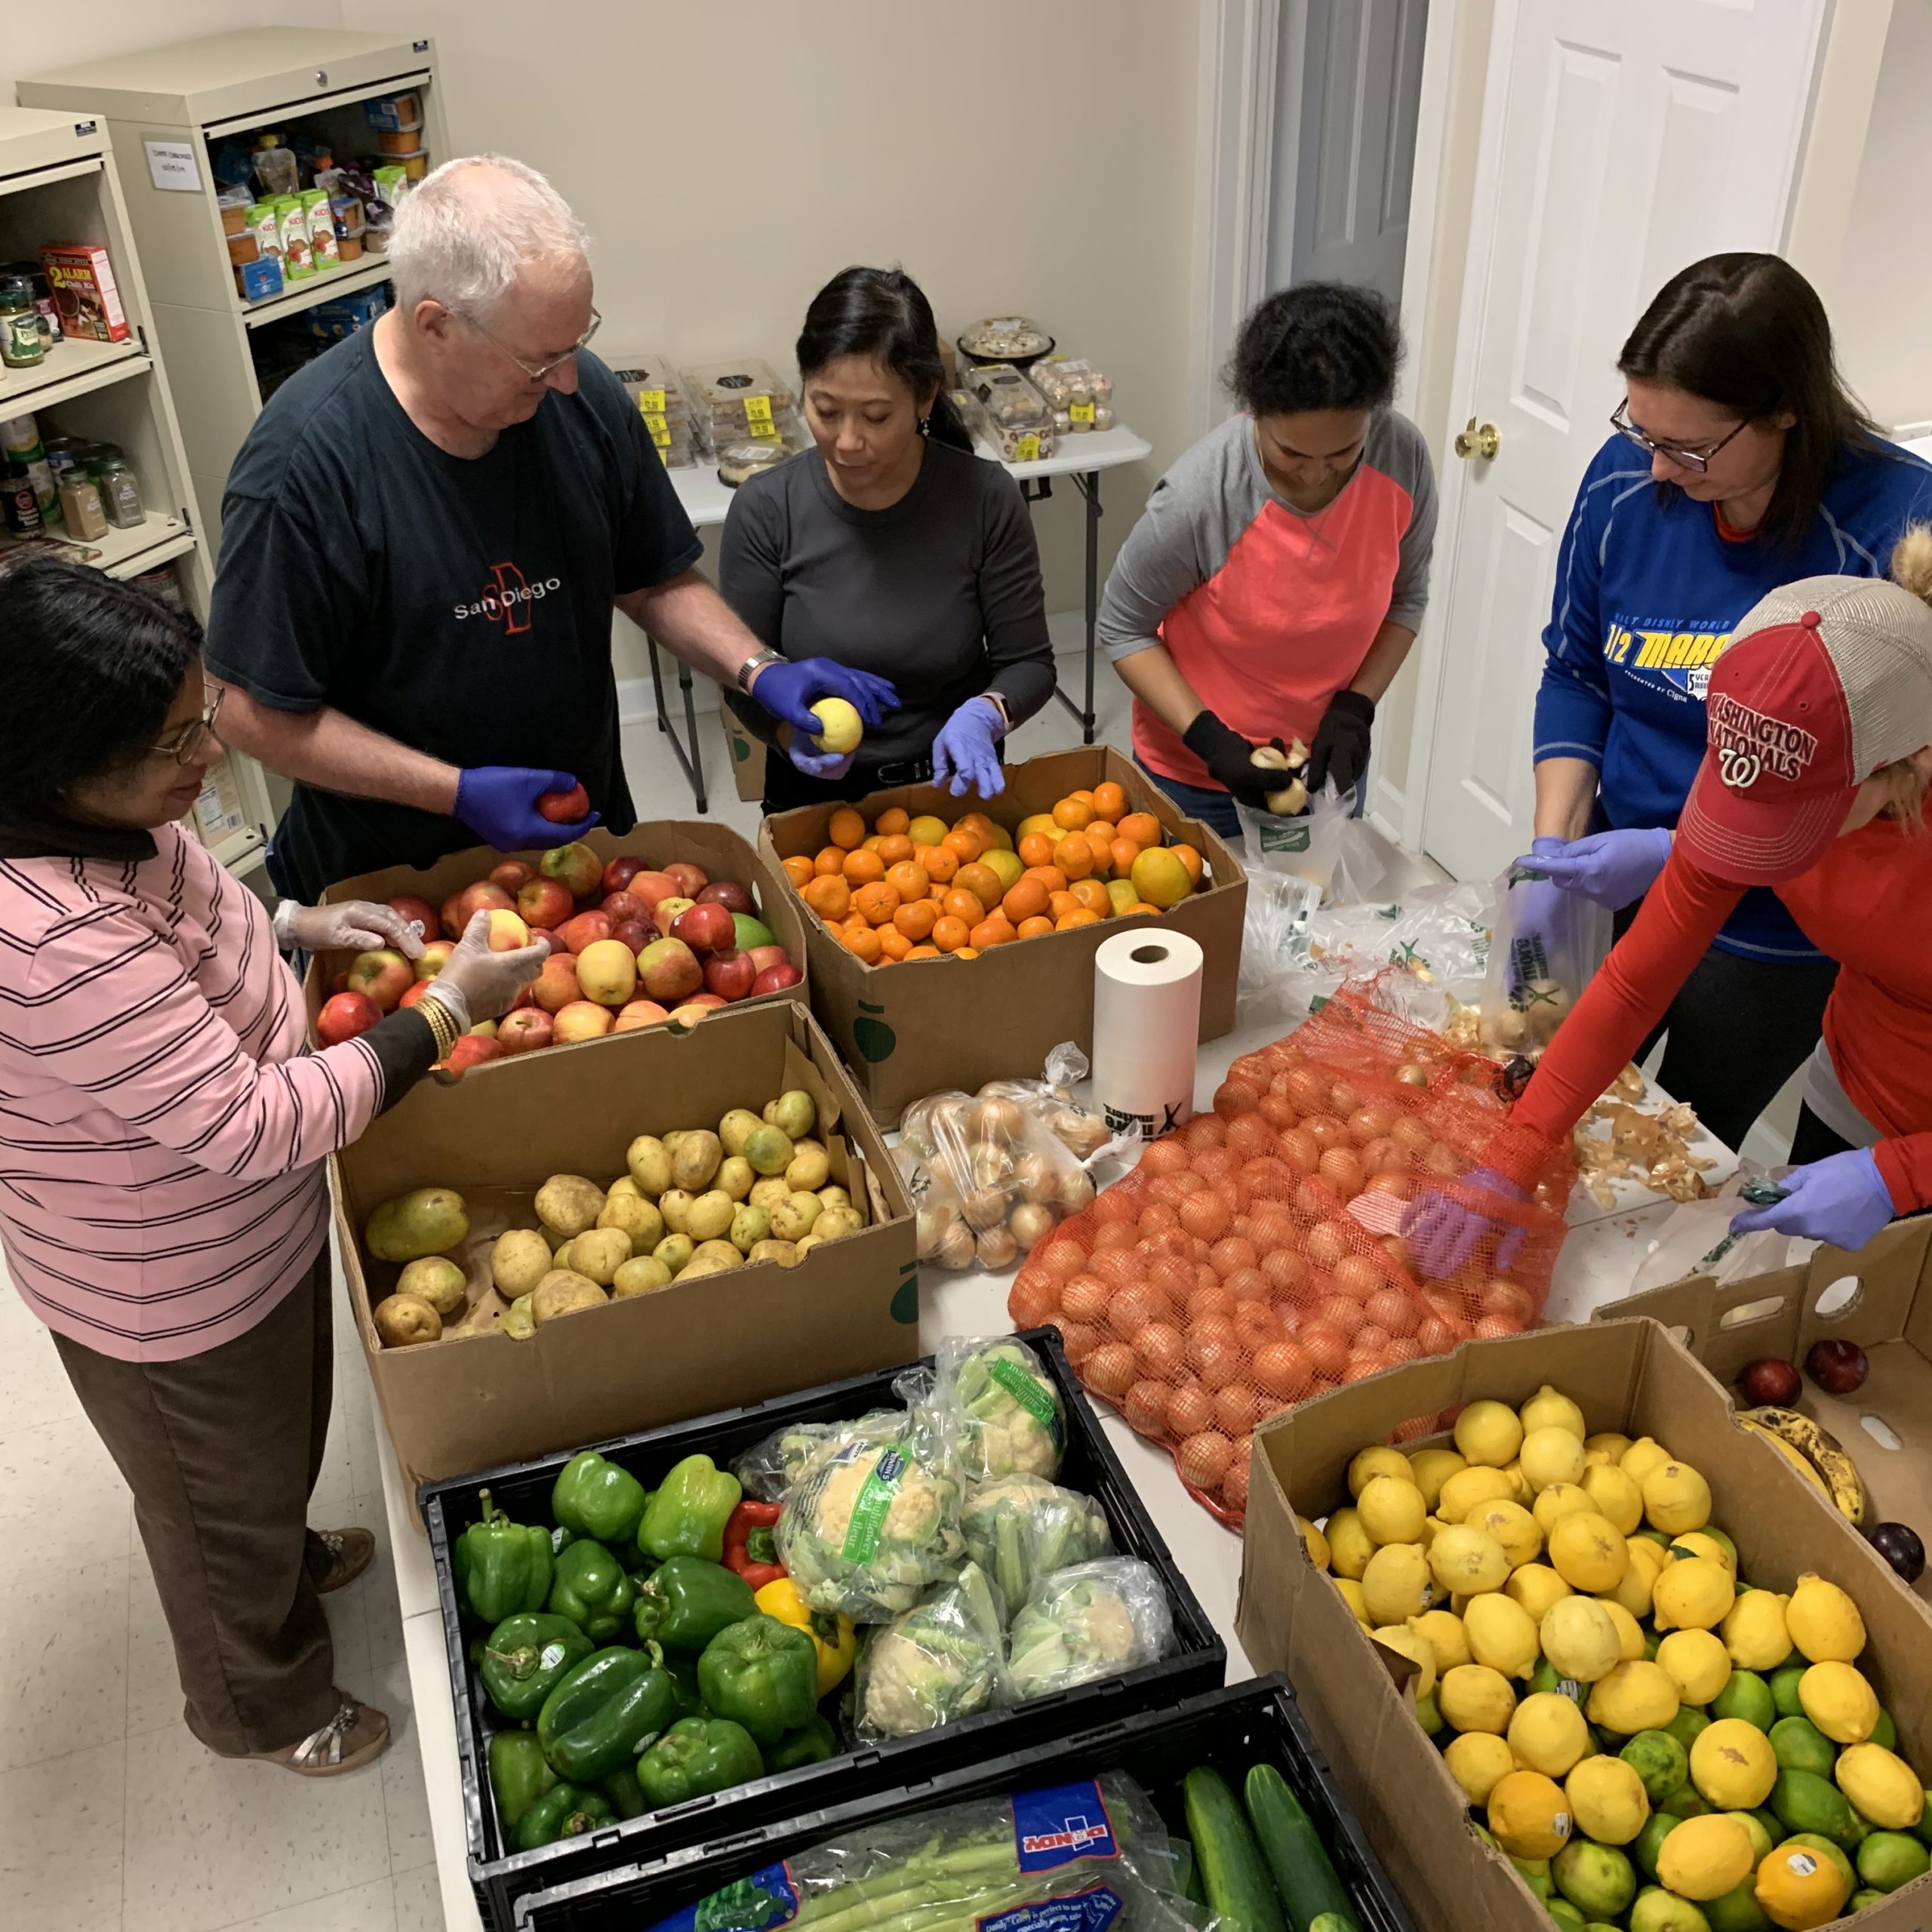 Dulles South Food Pantry